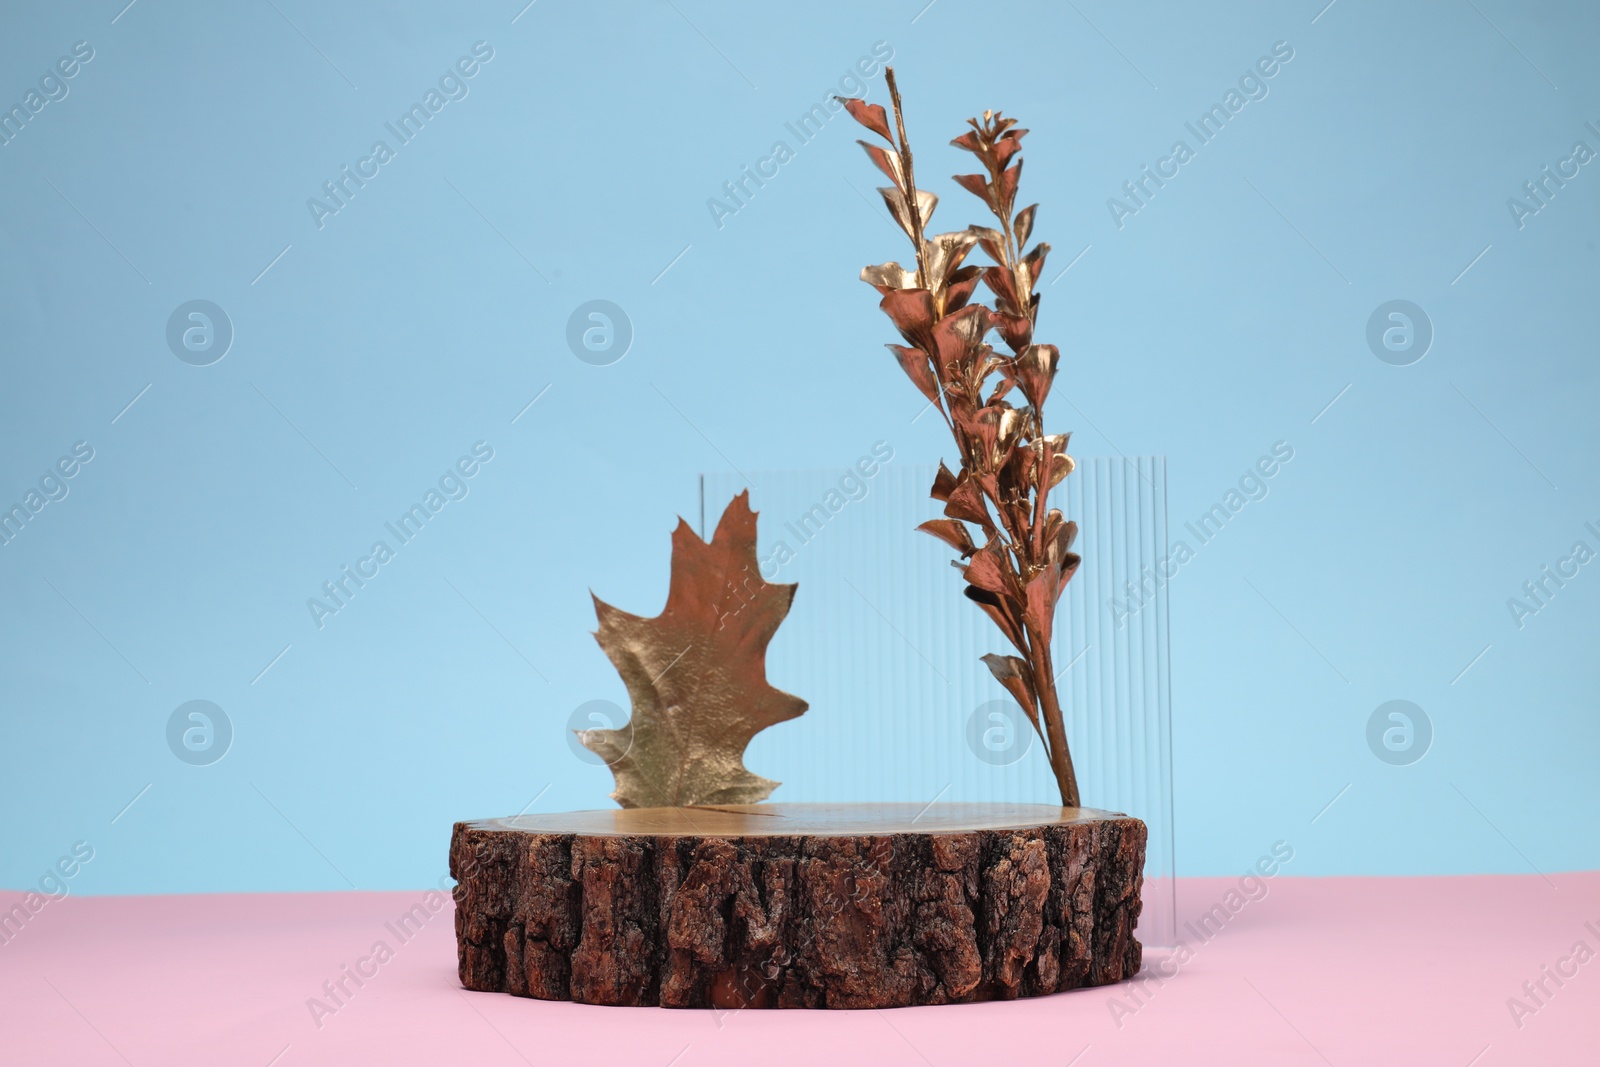 Photo of Autumn presentation for product. Wooden stump, geometric figure and golden leaves on color background